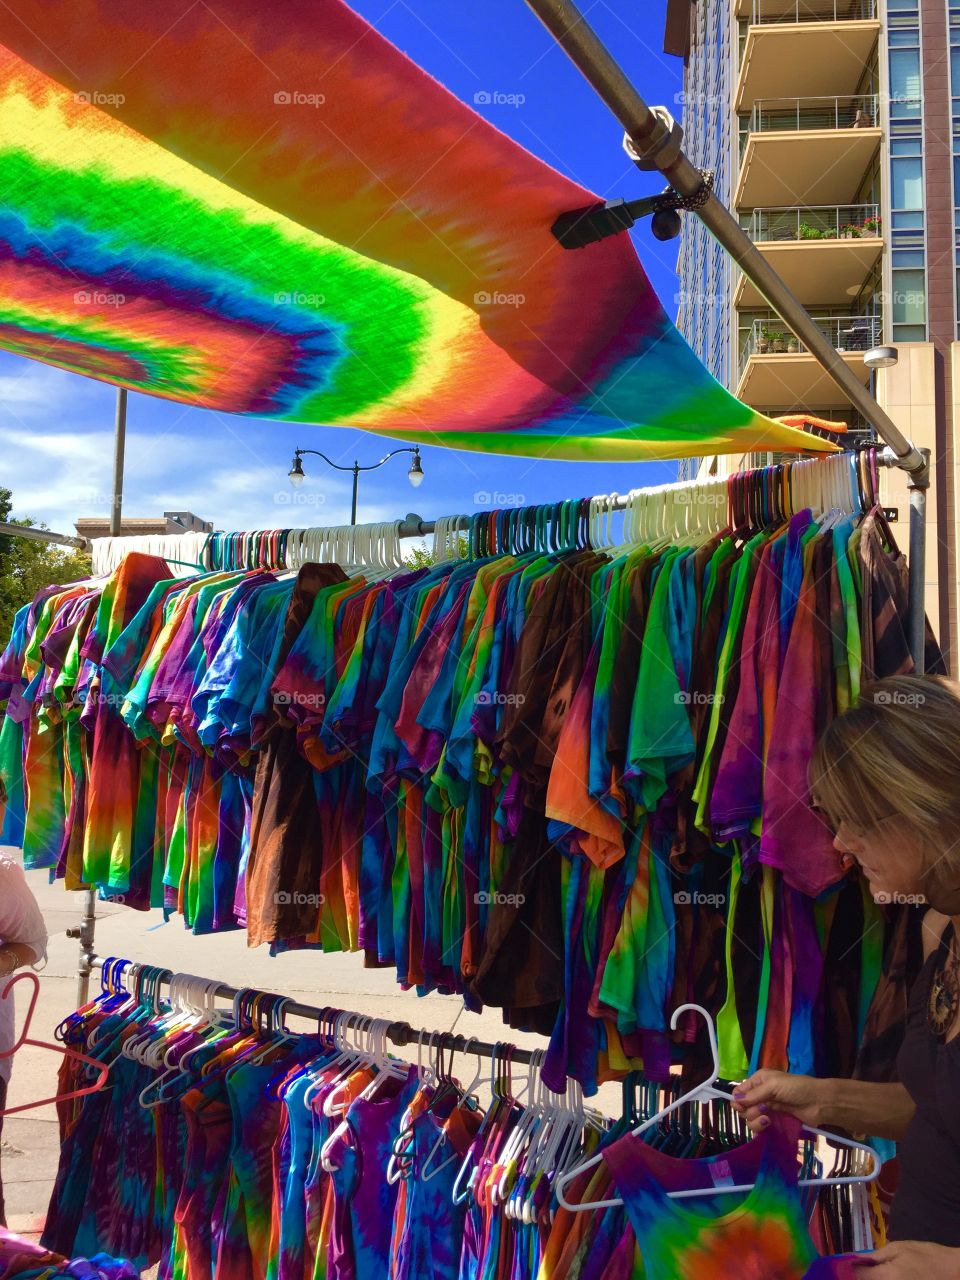 Dye Shirts . Took this photo during Farmers Market in Madison Wisconsin . 